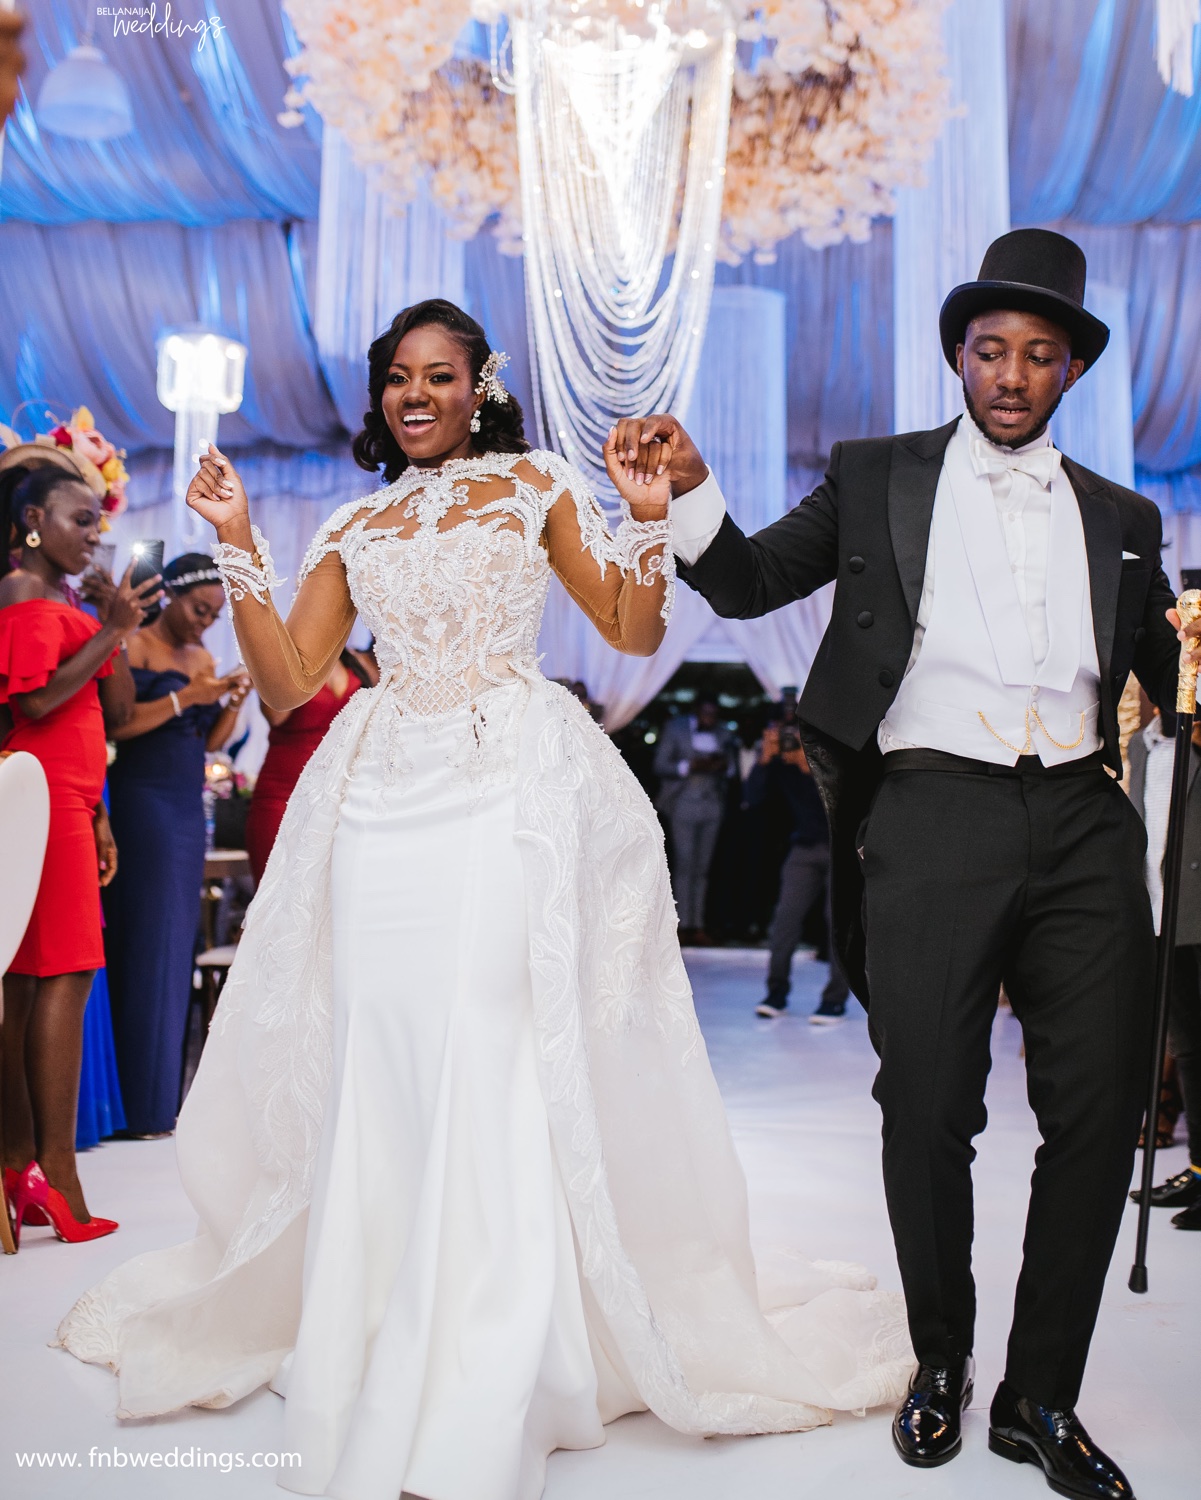 You are My World! Esinam & Wendell's Beautiful Wedding in Ghana